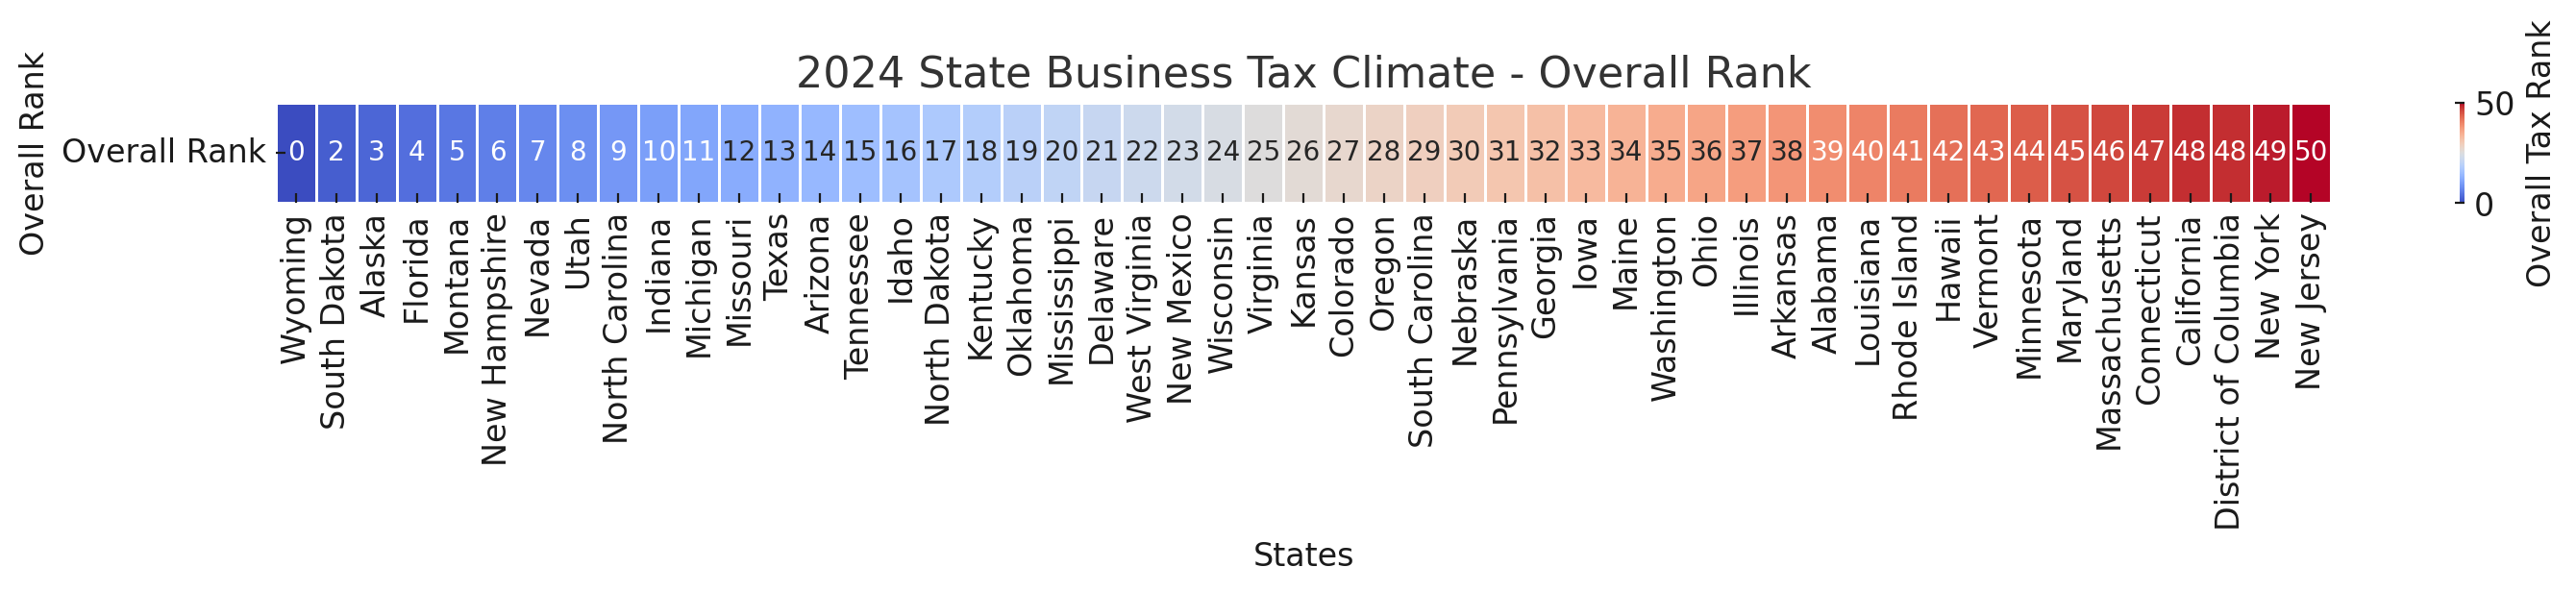 2024-state-business-tax-climate-overall-rank